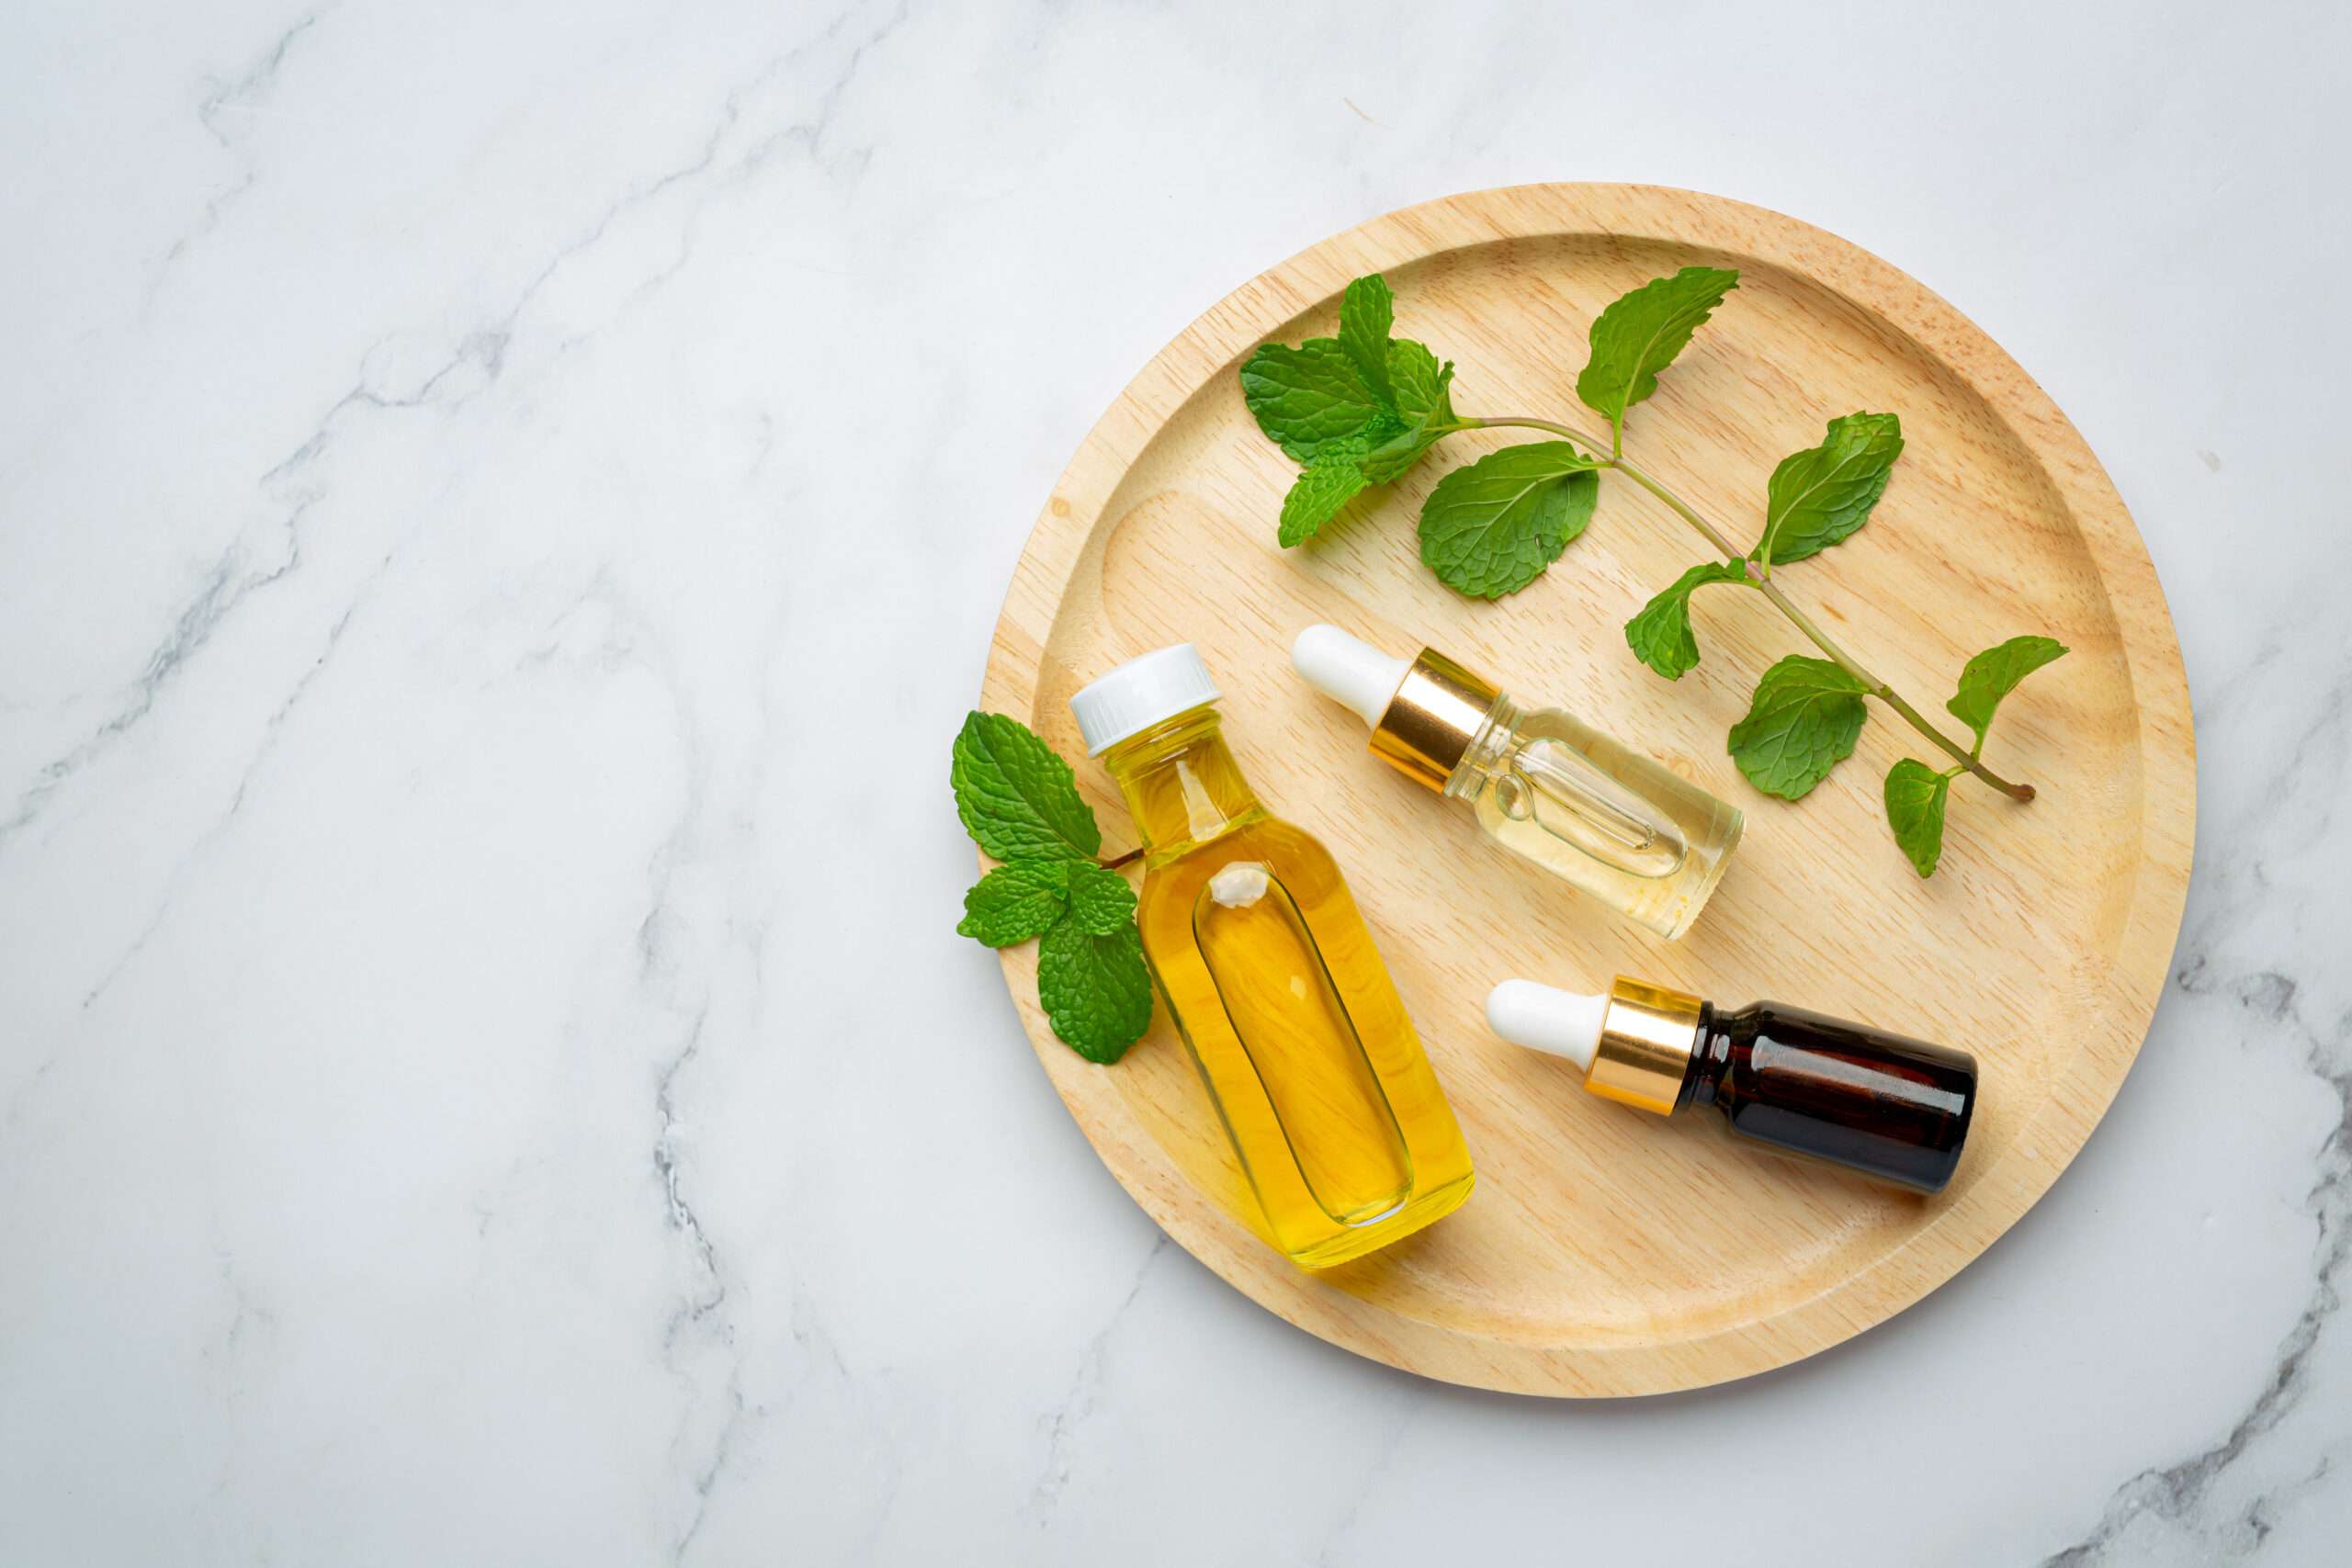 How to choose and use essential oil?